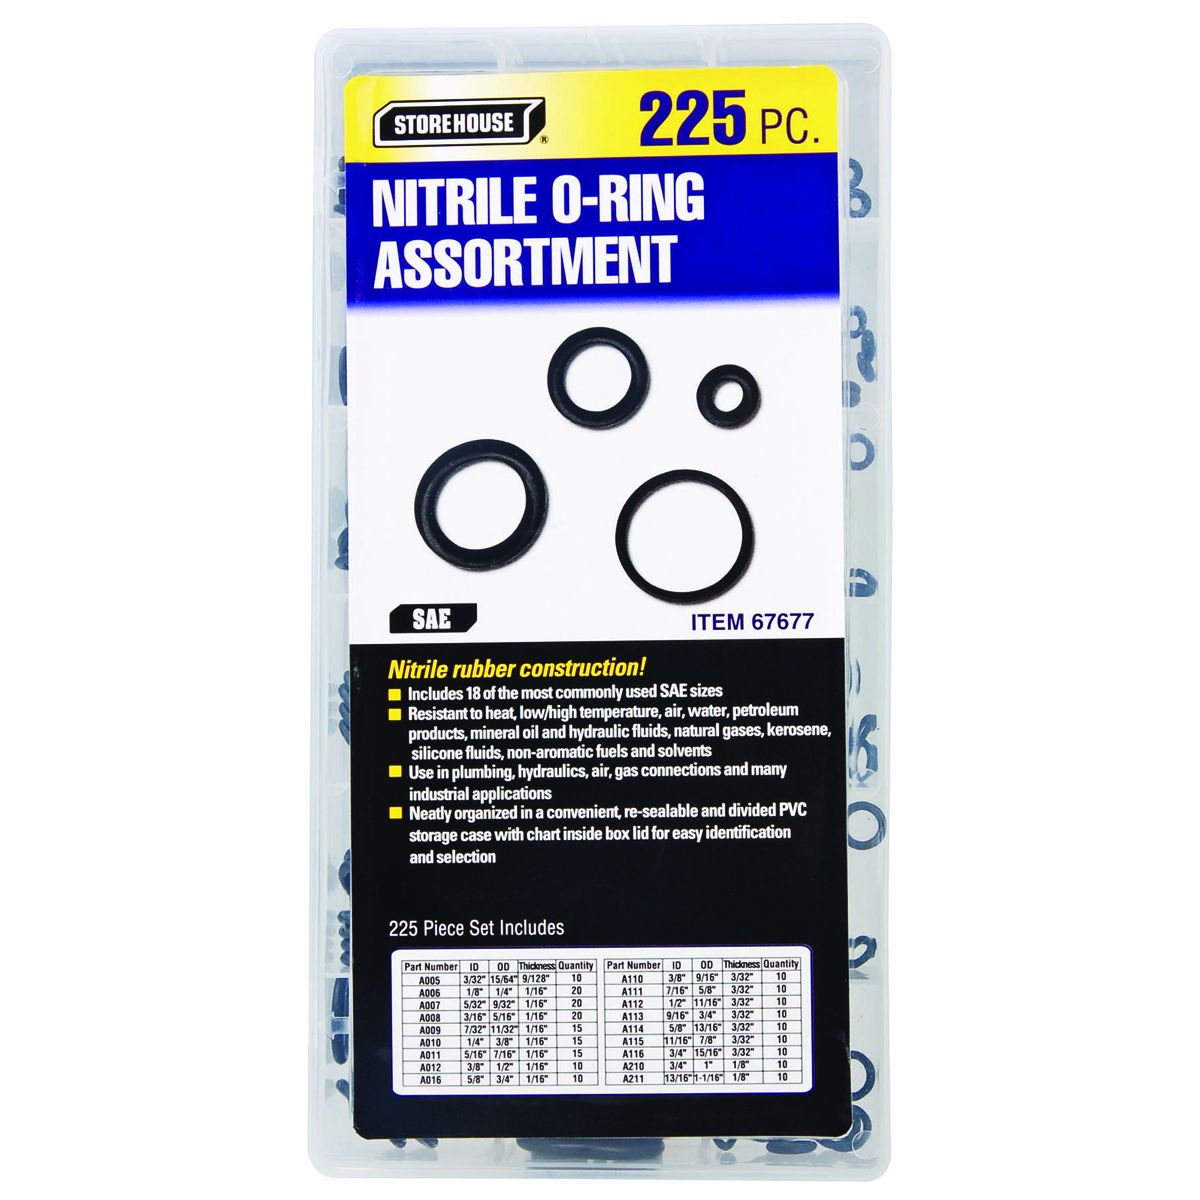 STOREHOUSE 225 Piece Nitrile O-Ring Assortment